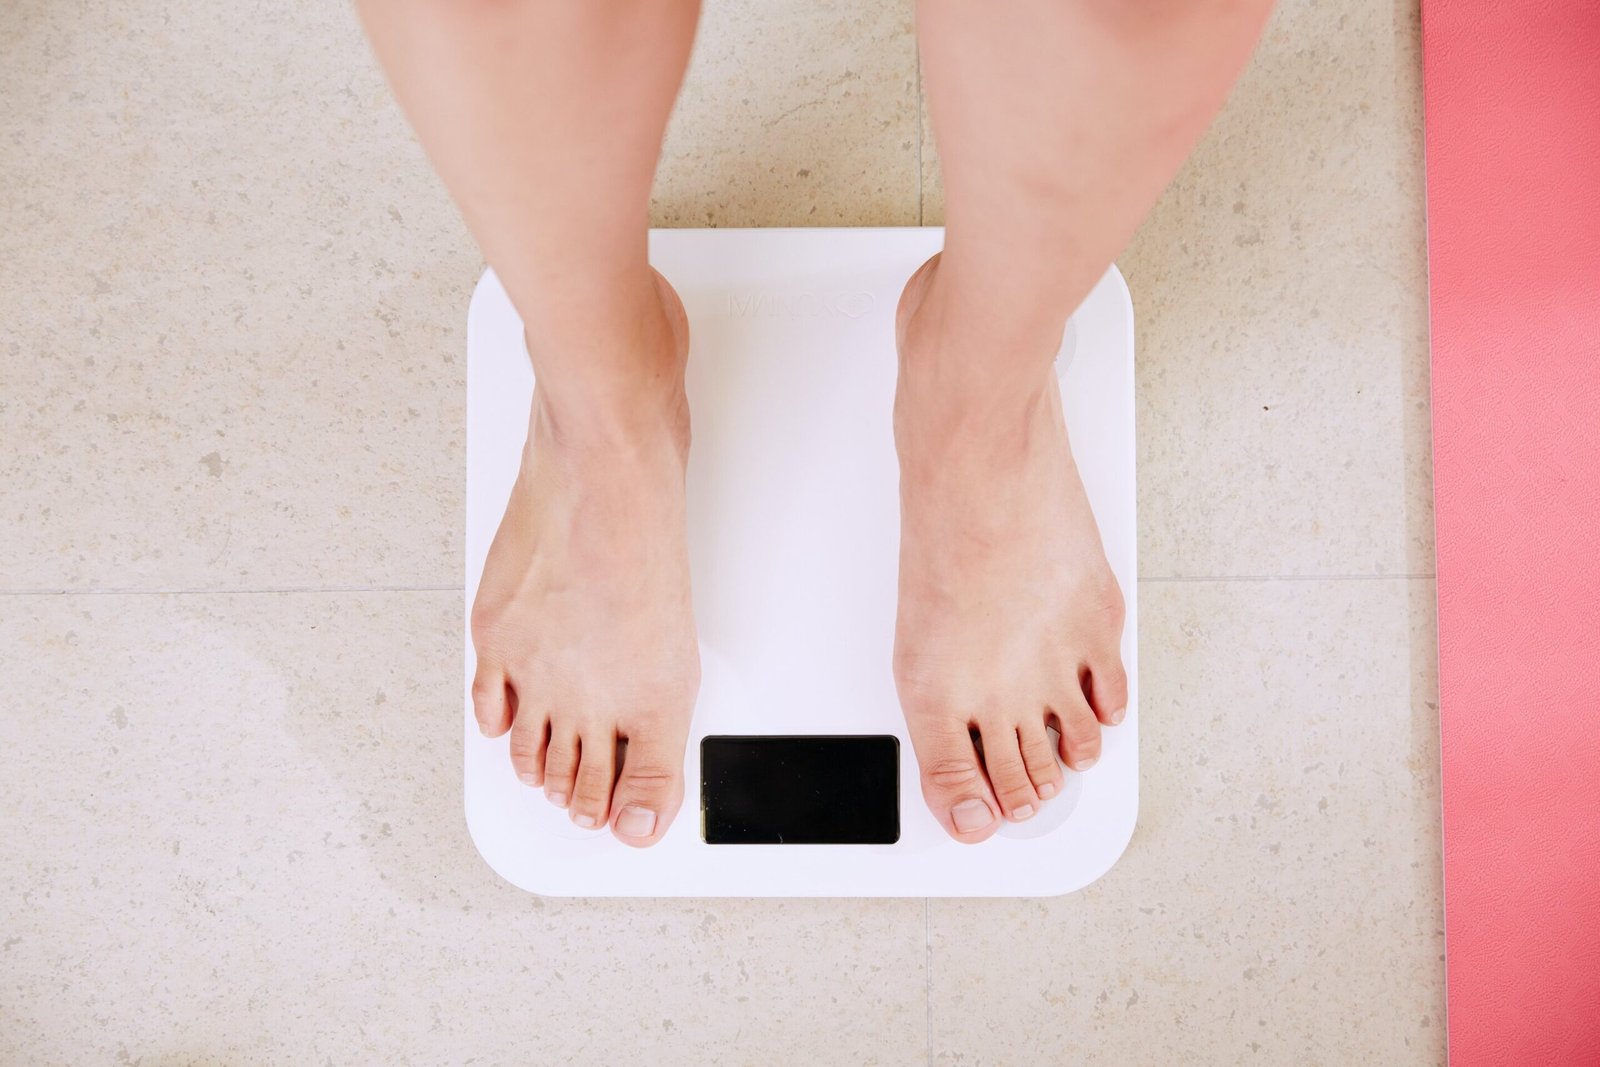 New analysis shows tirzepatide consistently reduces body weight regardless of body mass index BMI before treatment